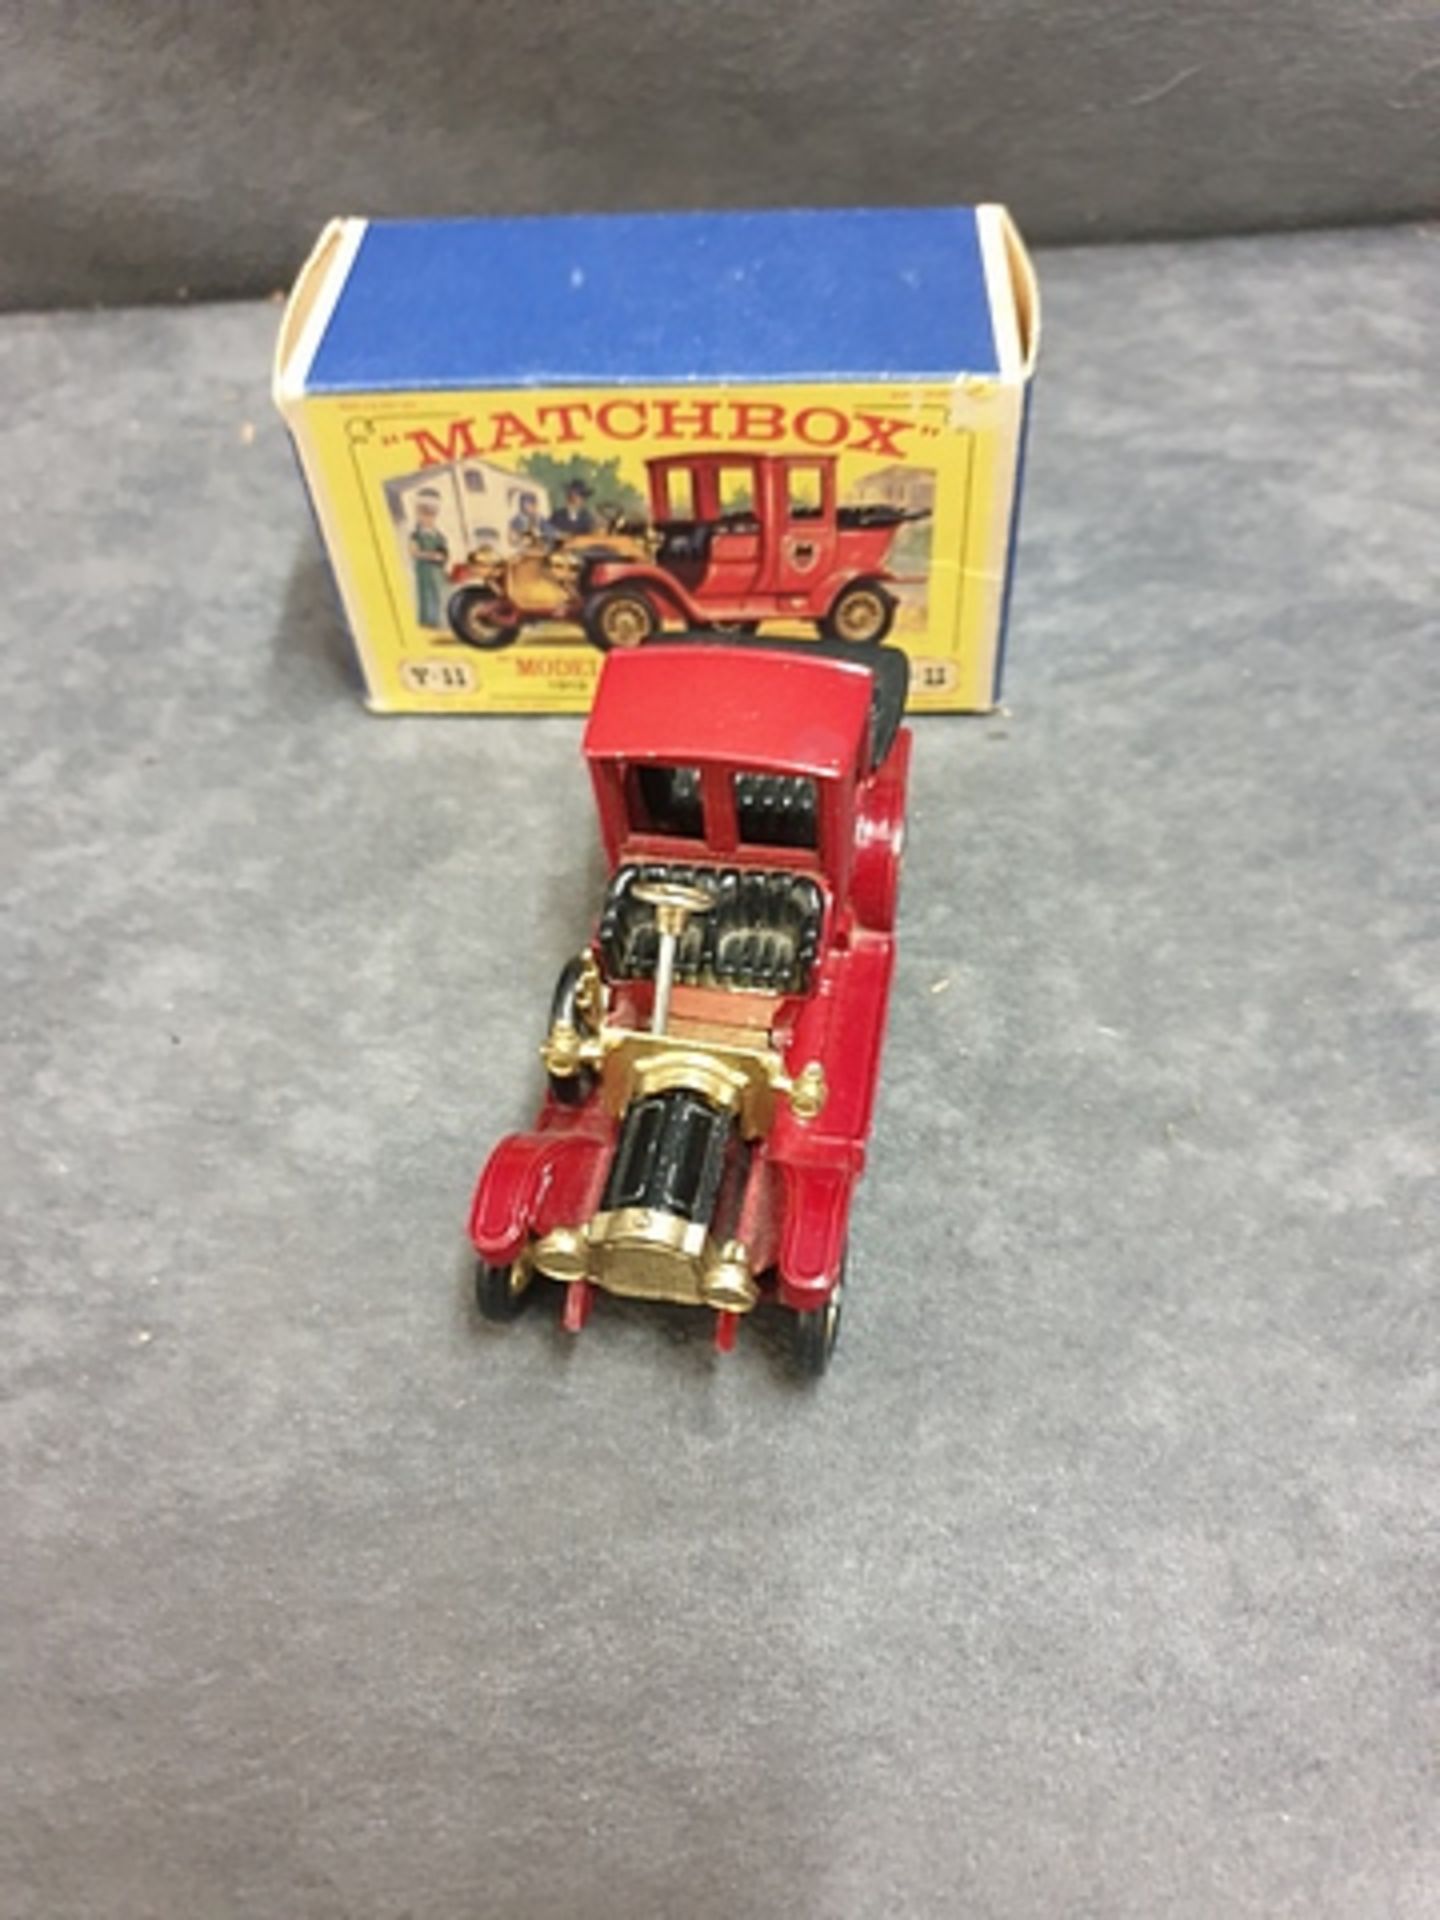 Matchbox Models Of Yesteryear #Y-11 1912 Packard Landaulet Painted A Dark Red With A Black Bonnet - Image 2 of 2